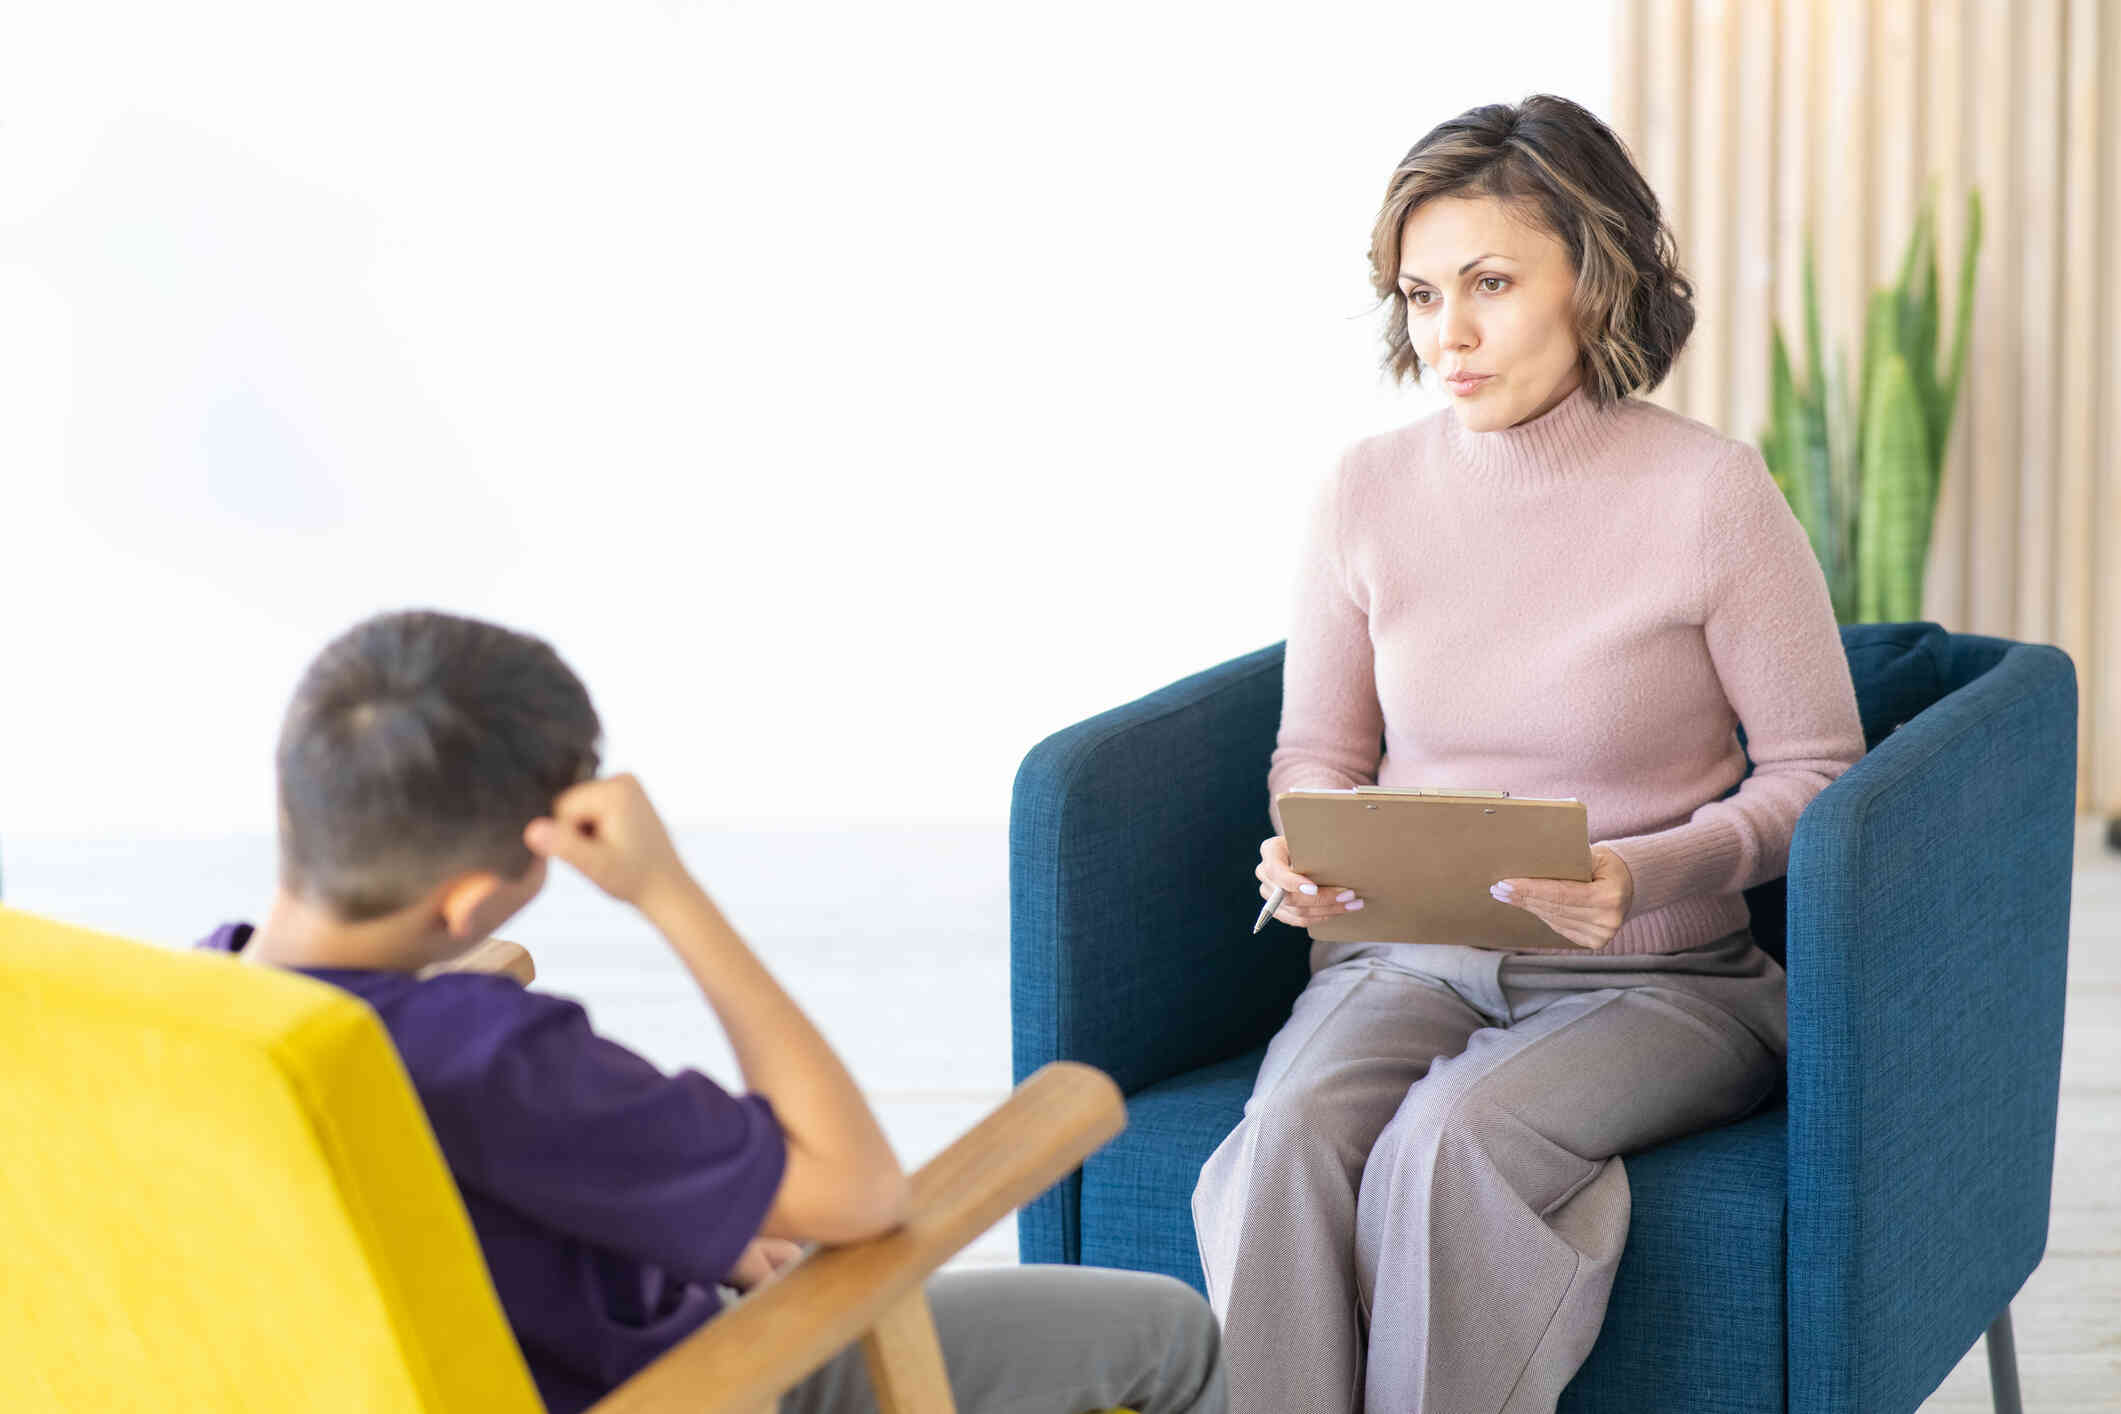 A young boy sits in a yellow shair and listens to the female therapist sitting across from him during a therapy session.